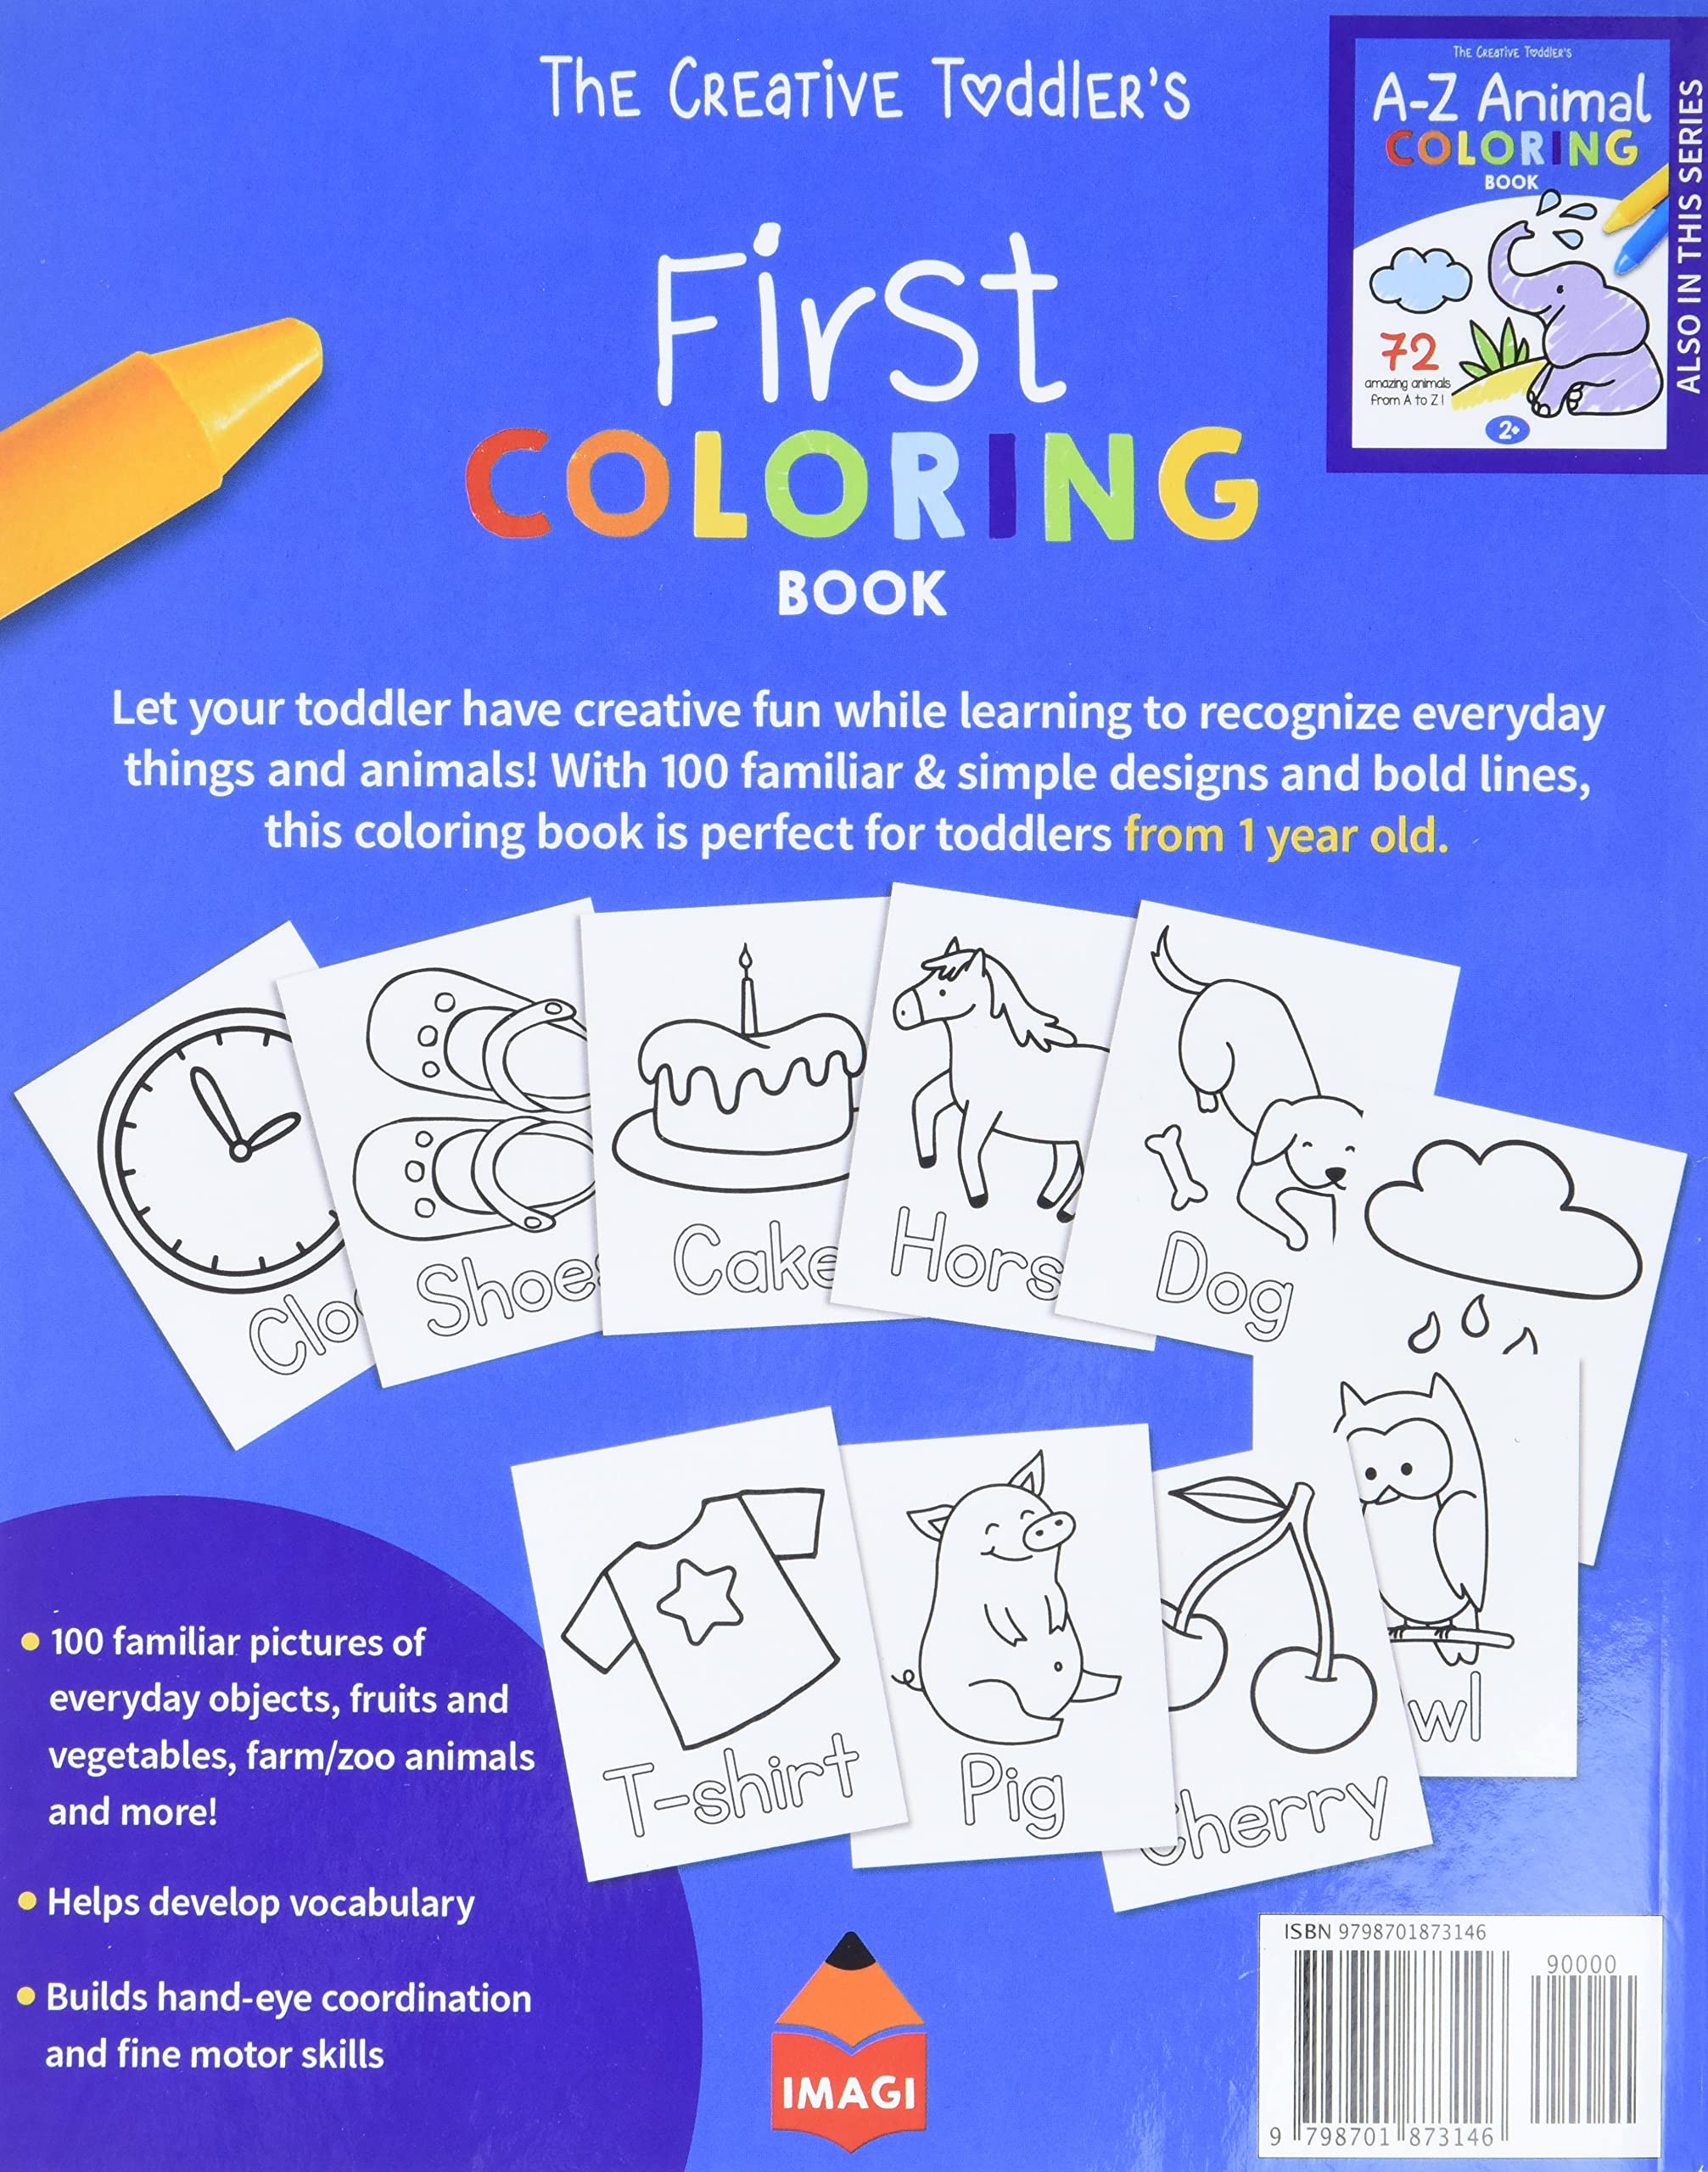 The Creative Toddler’s First Coloring Book Ages 1-3: 100 Everyday Things and Animals to Color and Learn | For Toddlers and Kids ages 1, 2 & 3 (US Edition)